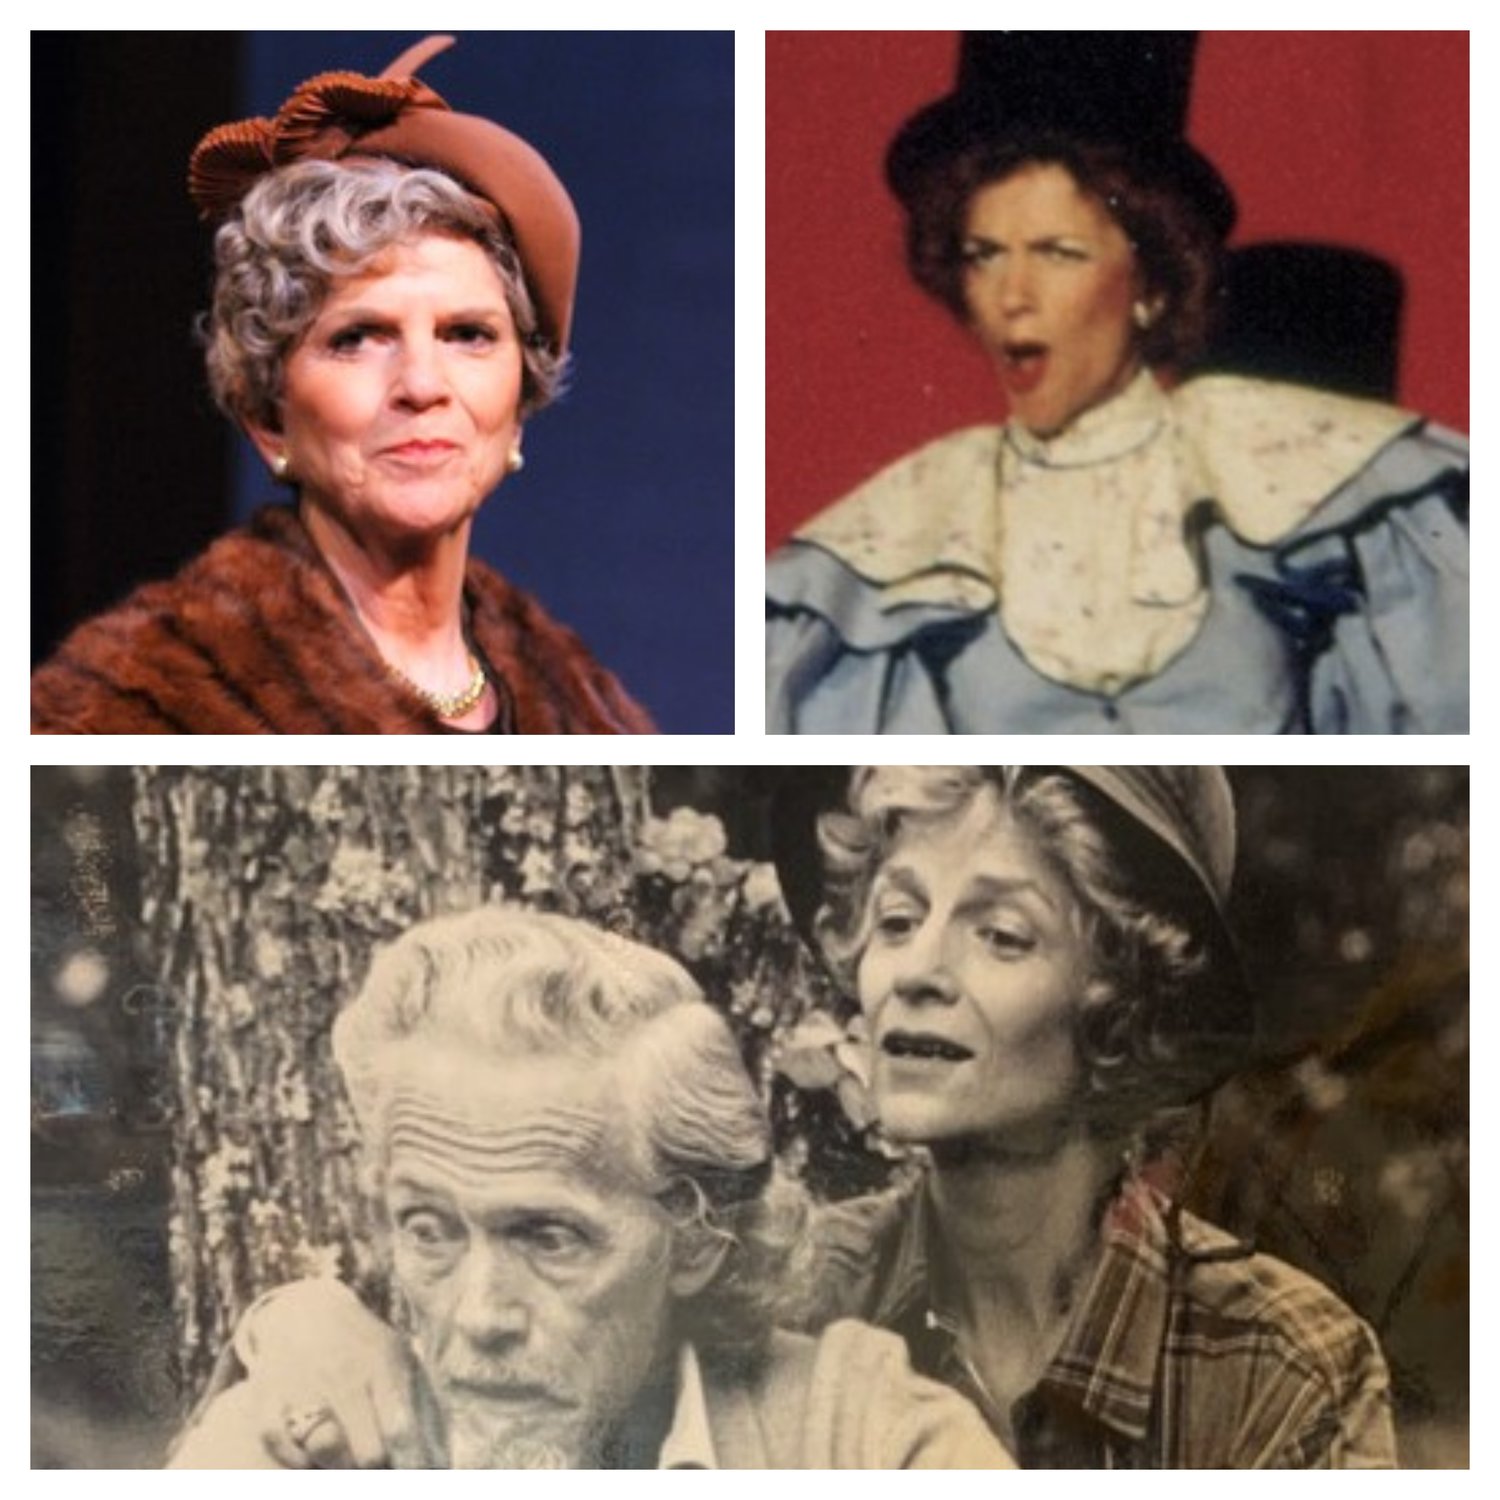 Bo Thorp played a range of characters on the Fayetteville stage, including the title characters in "Driving Miss Daisy" at Cape Fear Regional Theatre and "Hello, Dolly!" at Fayetteville Little Theatre. Below, she starred with Pat Reese in "On Golden Pond" at Fort Bragg Playhouse. Bo Thorp died on Oct. 14at age 89